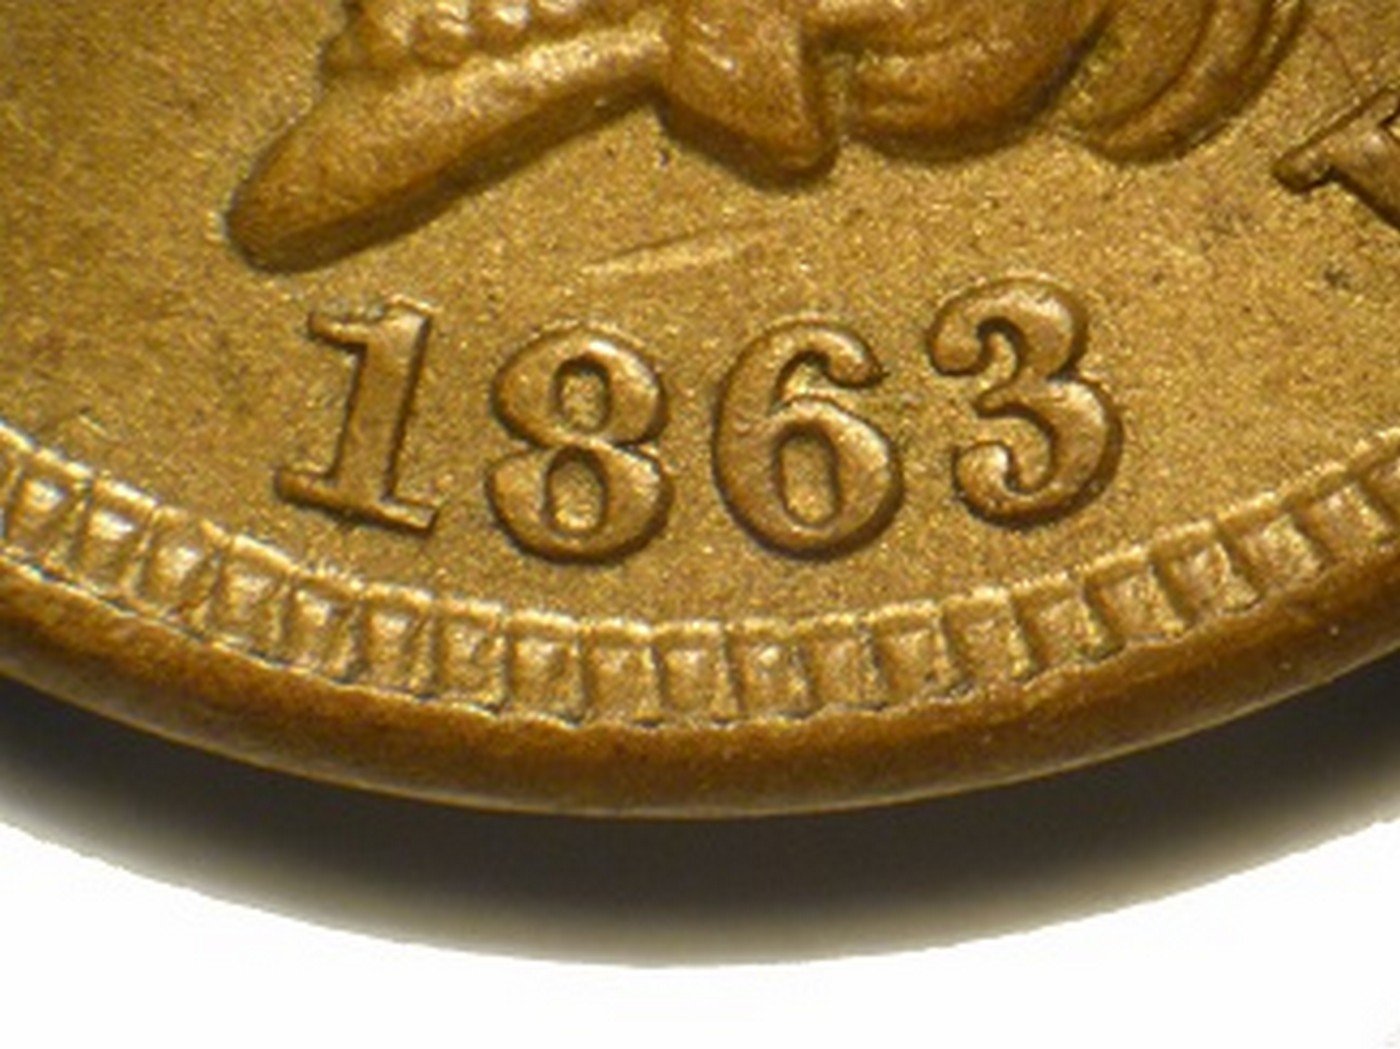 1863 Obverse of ODD-008, CUD-019 - Indian Head Penny - Photo by David Poliquin